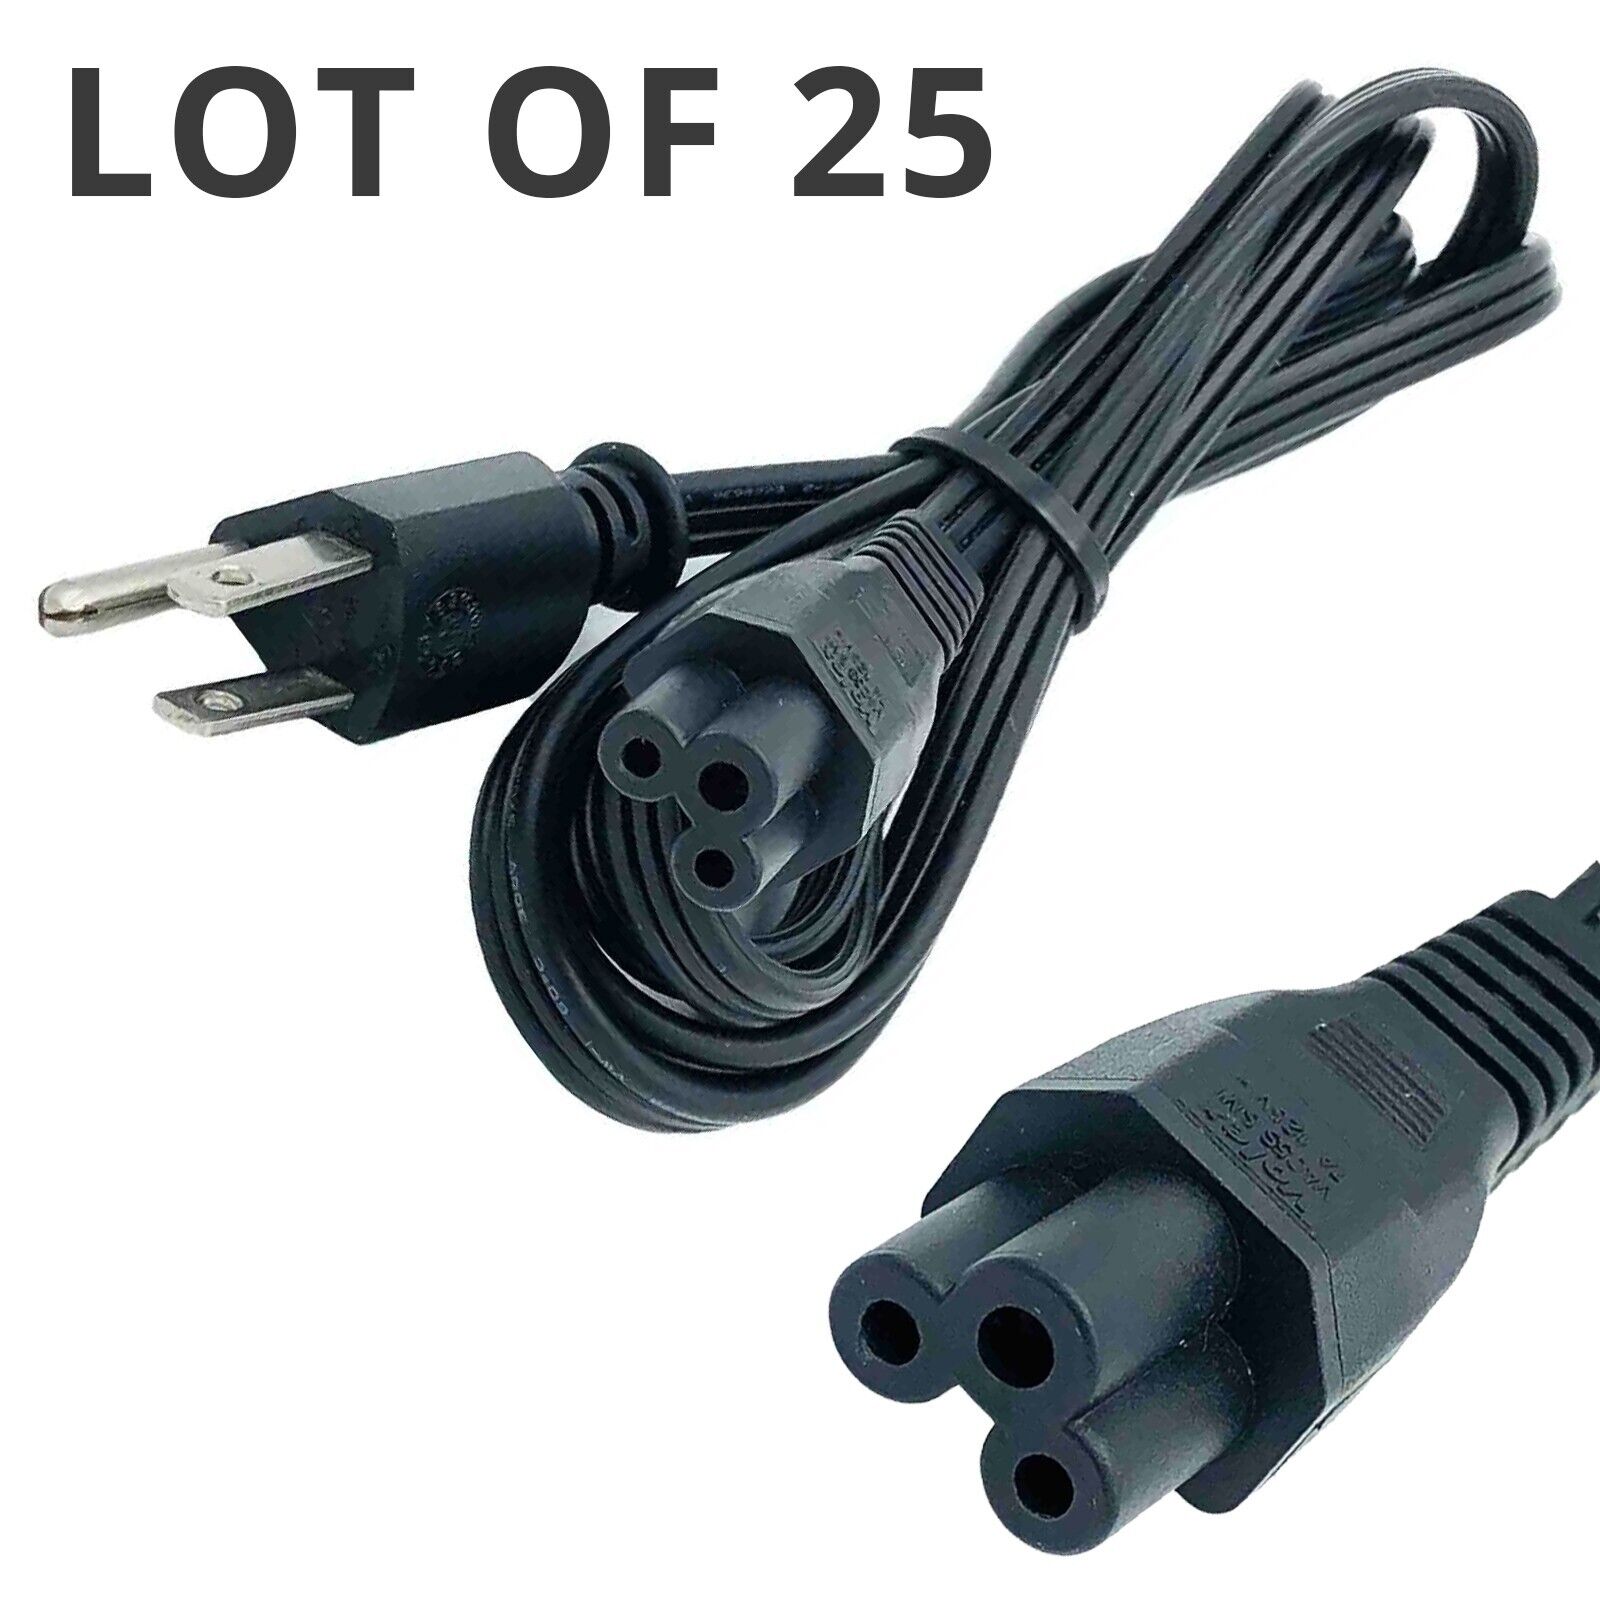 LOT 25 Branded 6 ft 3-Prong Mickey Mouse AC Power Cord for Laptop PC Printer